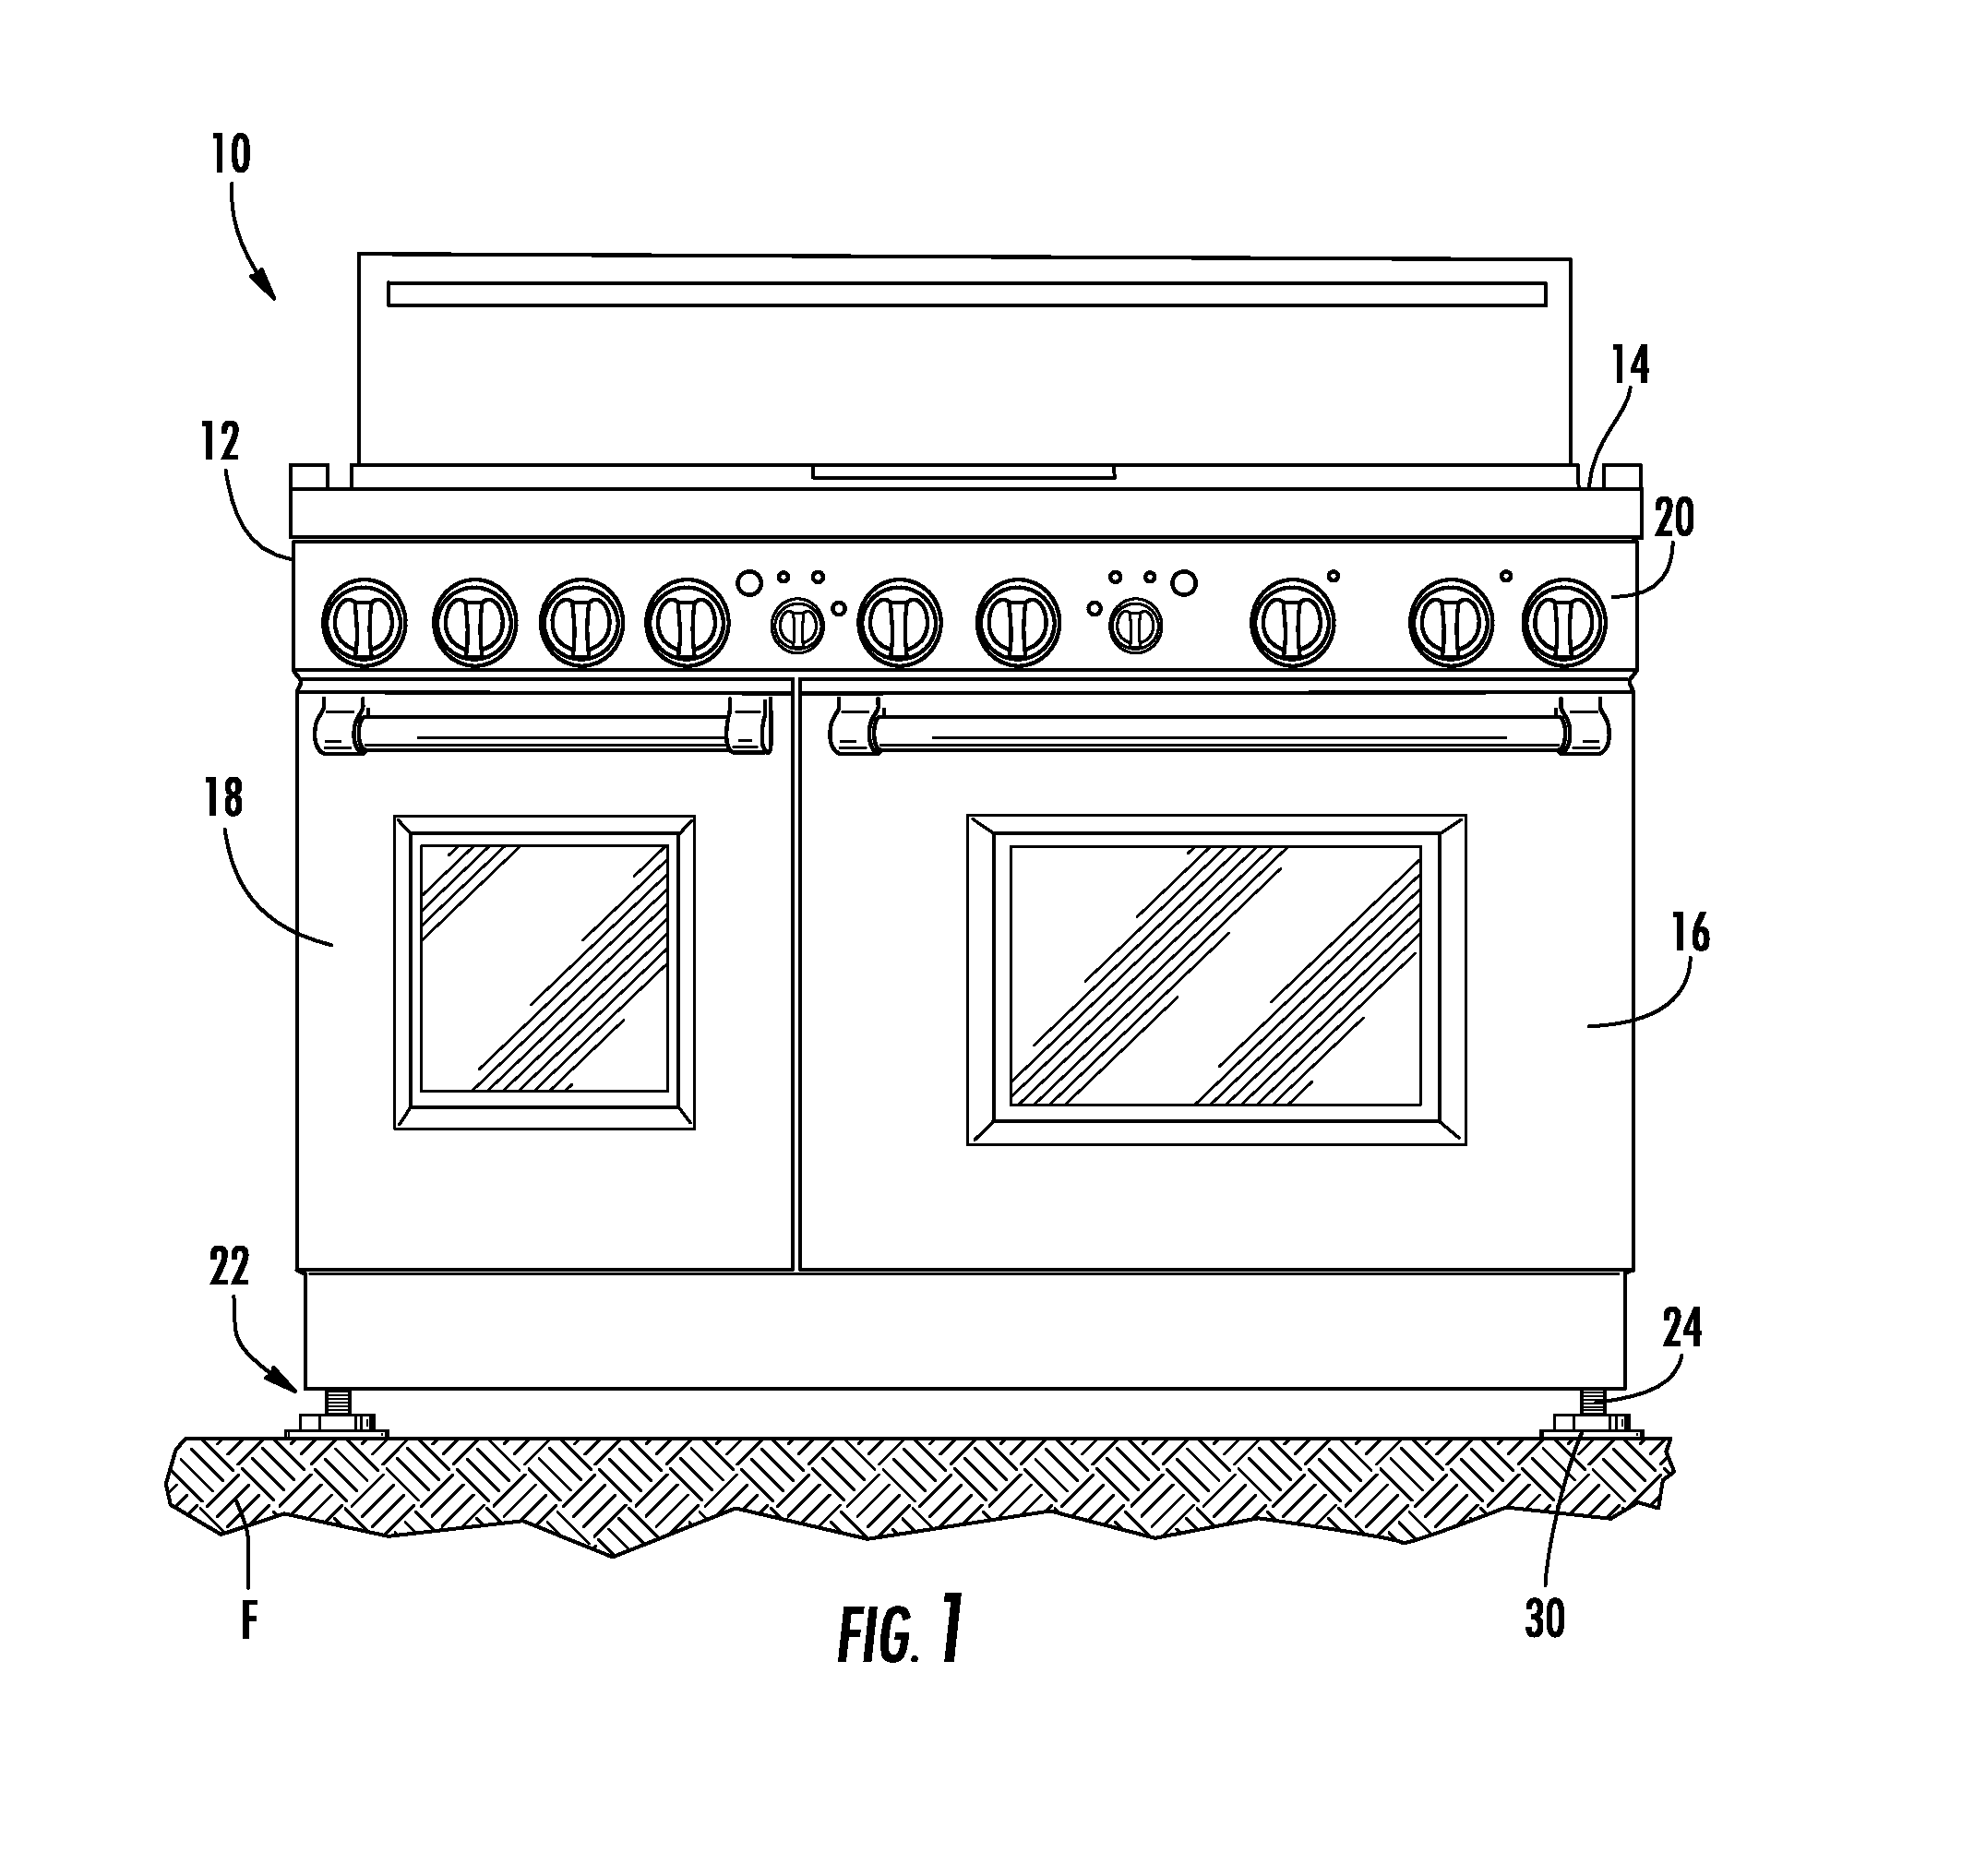 Home appliance with support assembly